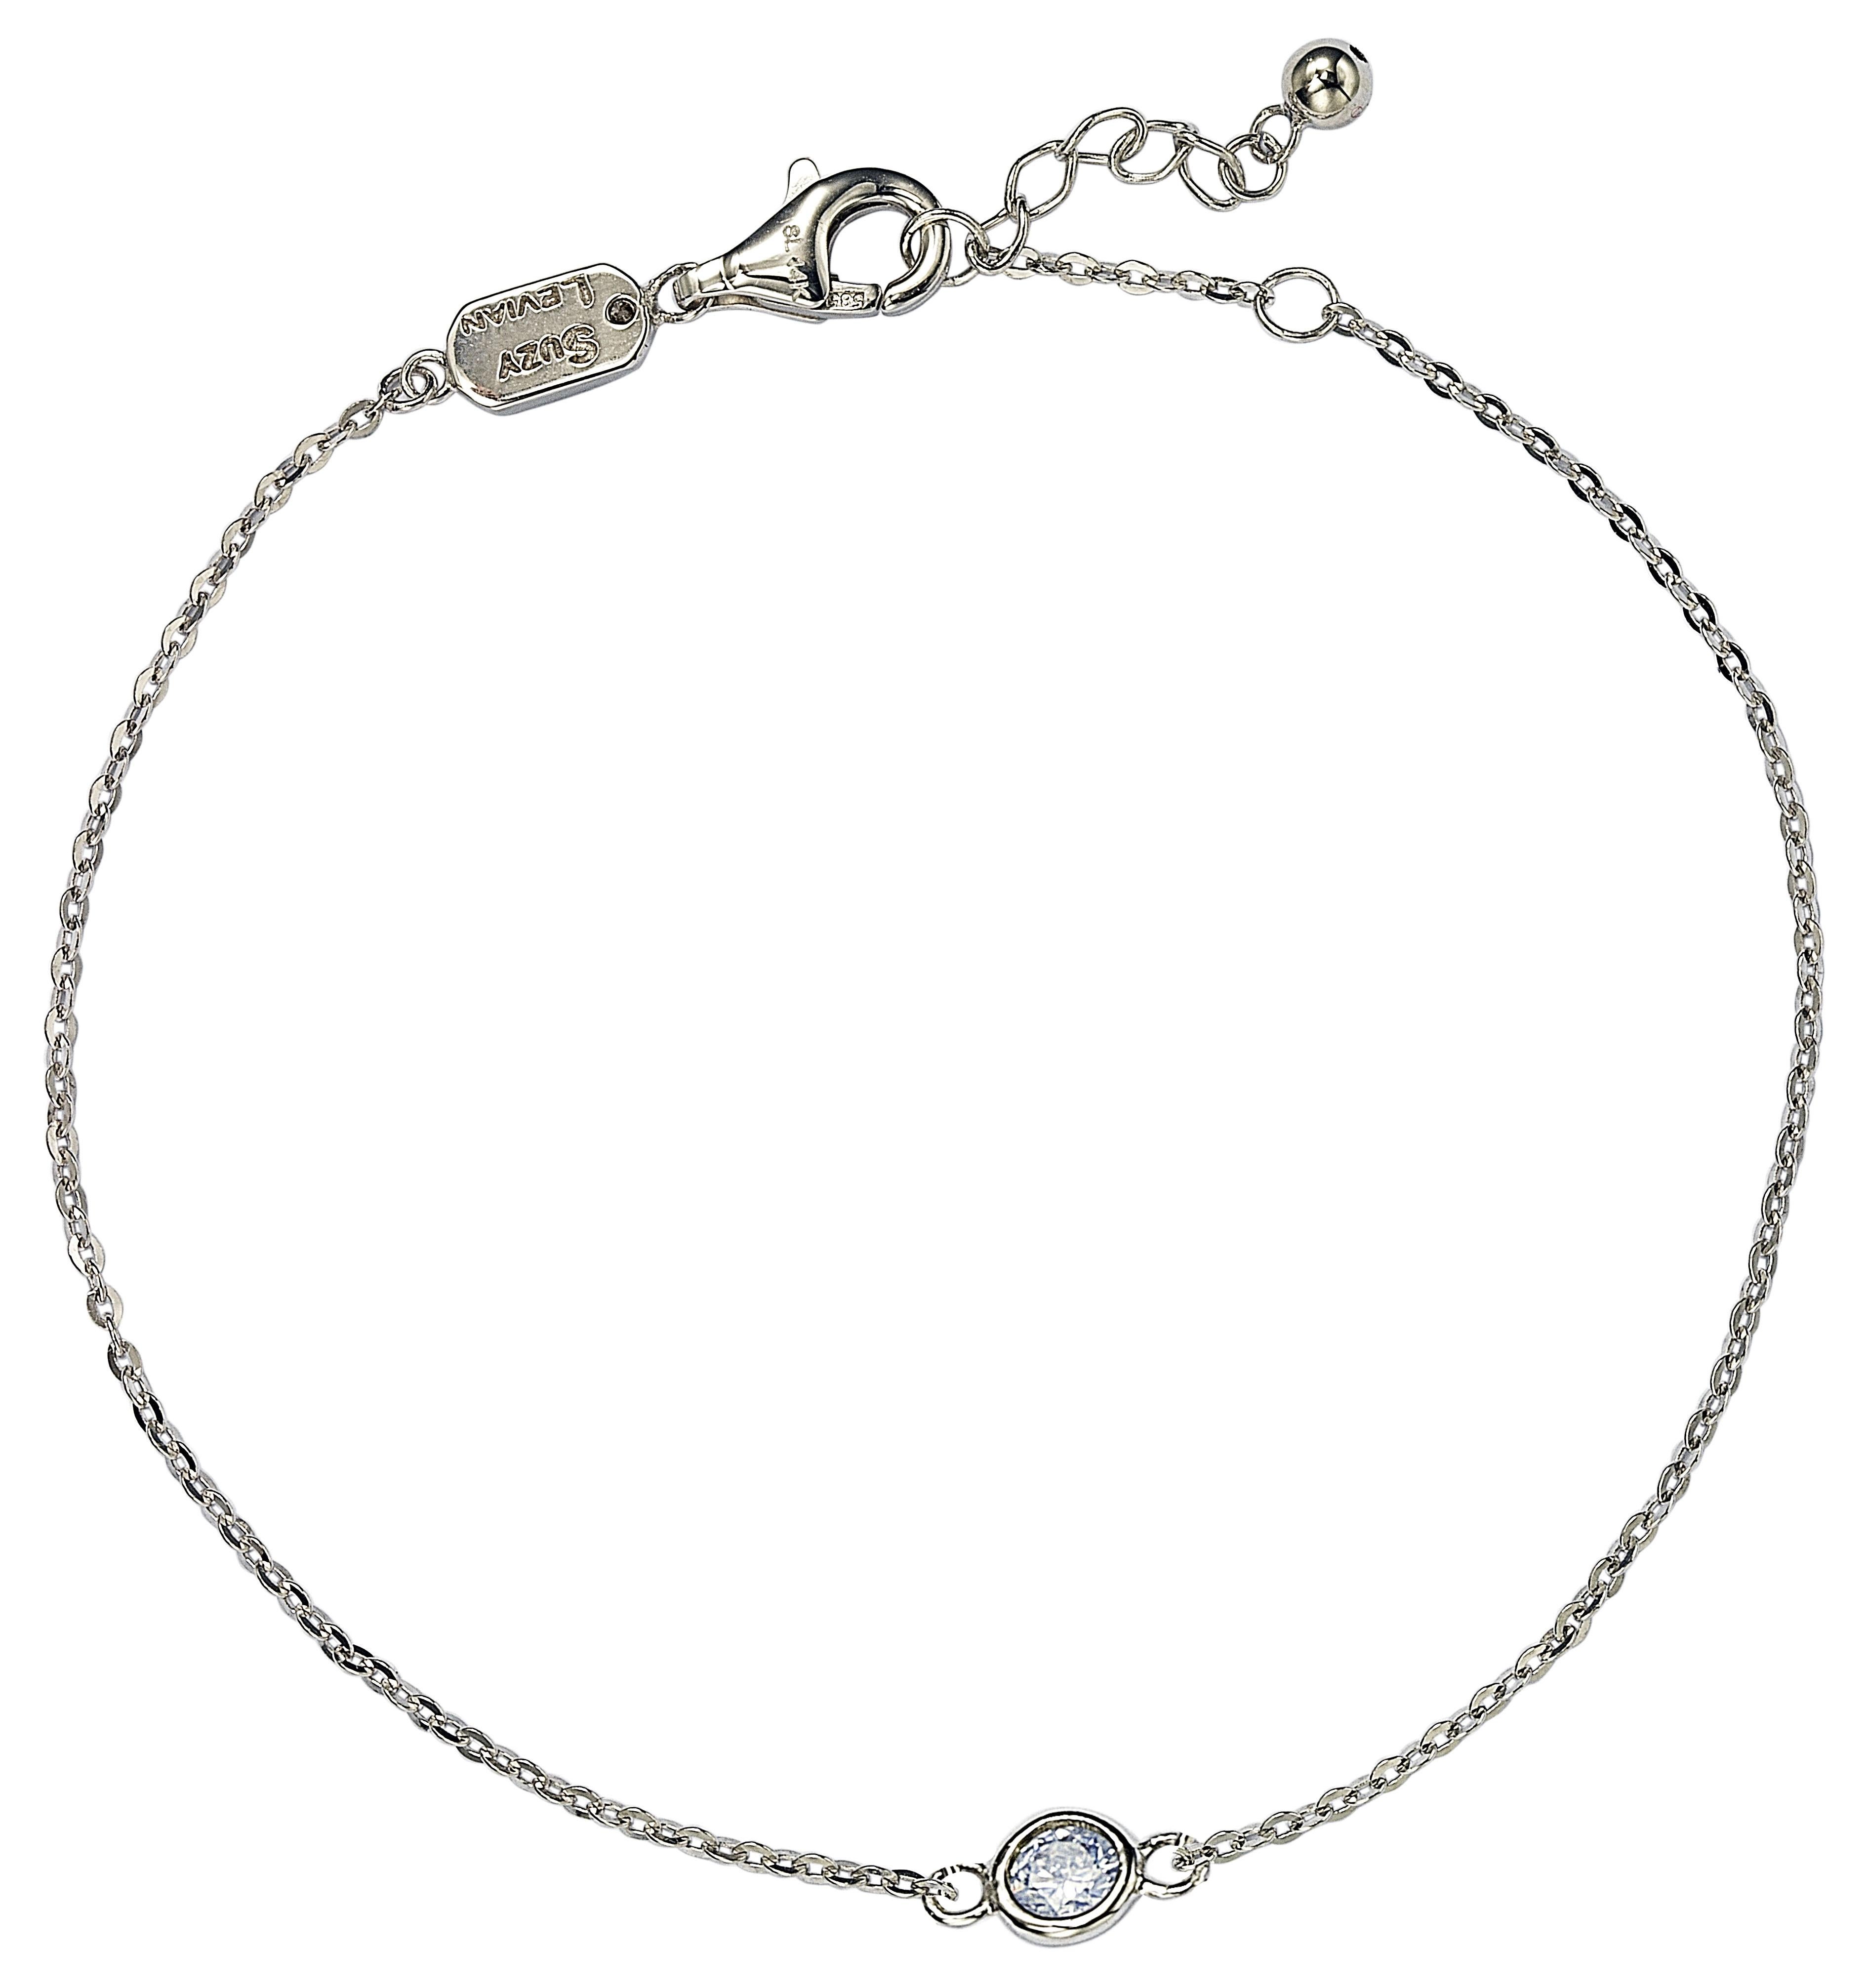 Add some sparkle to your wrist with this beautiful diamond solitaire bracelet by Suzy Levian. This magnificent bracelet boasts a brilliant round-cut diamond in an exquisite bezel adorned of 14-karat white gold. This bracelet features a high polish